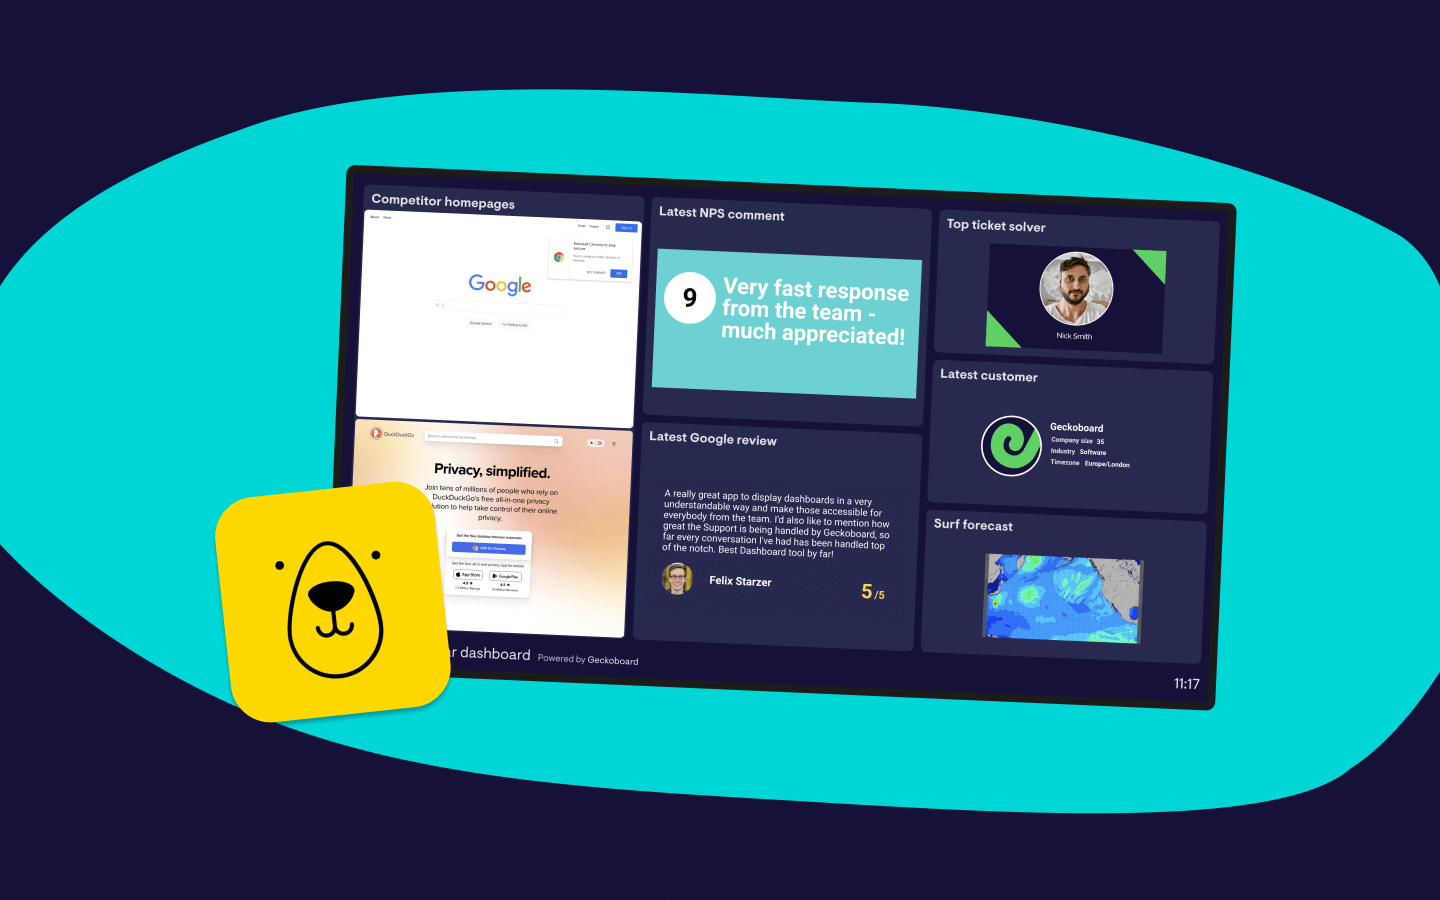 4 ways you can use our new Bannerbear integration to create even better dashboards